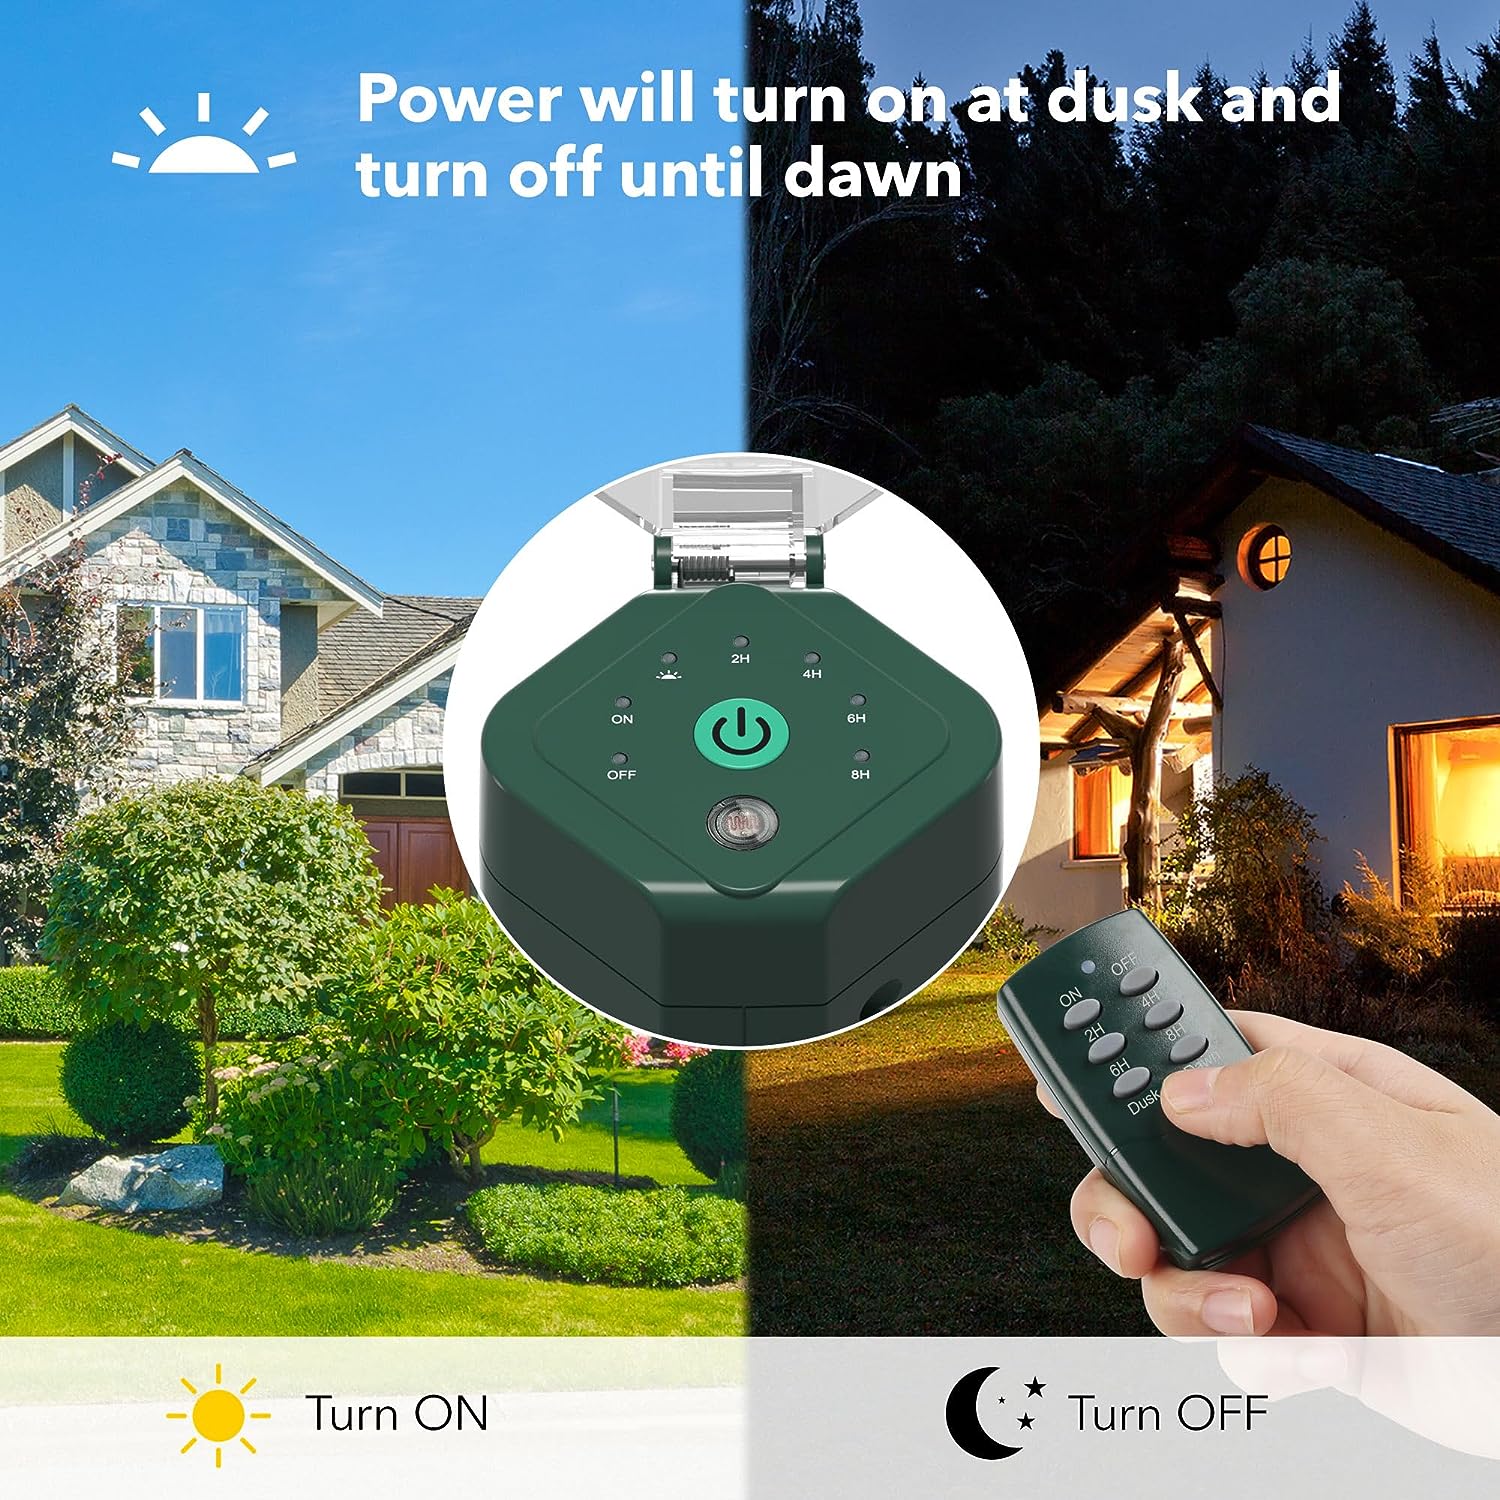 BN-Link BN-LINK Outdoor Power Strip Yard Stake Timer(w Remote Control) with  Photocell Dusk Till Dawn, or On at Dusk & 2, 4, 6, 8 Hour Co